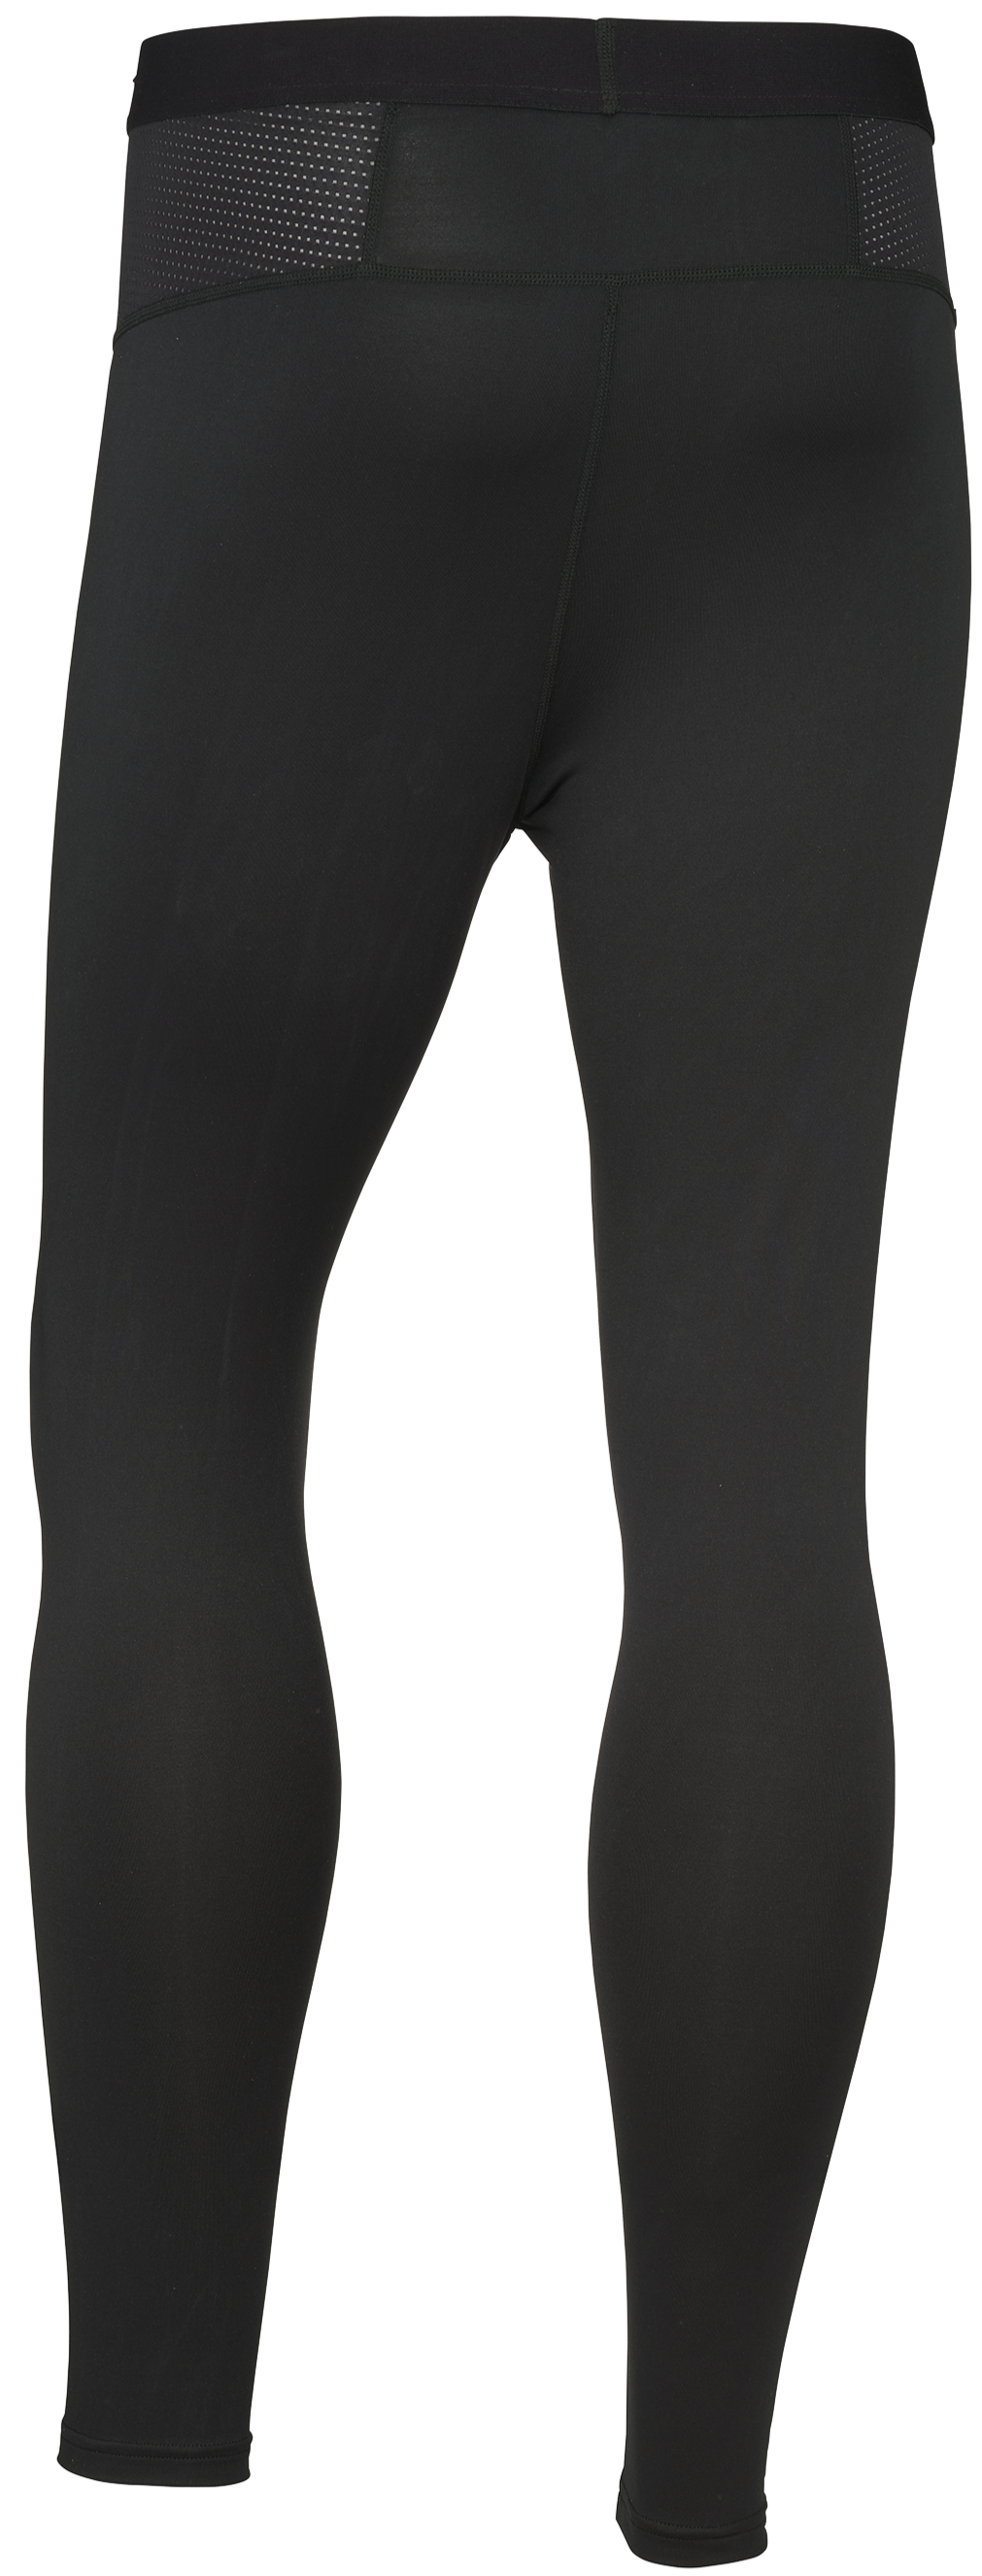 CCM Performance Pant Youth